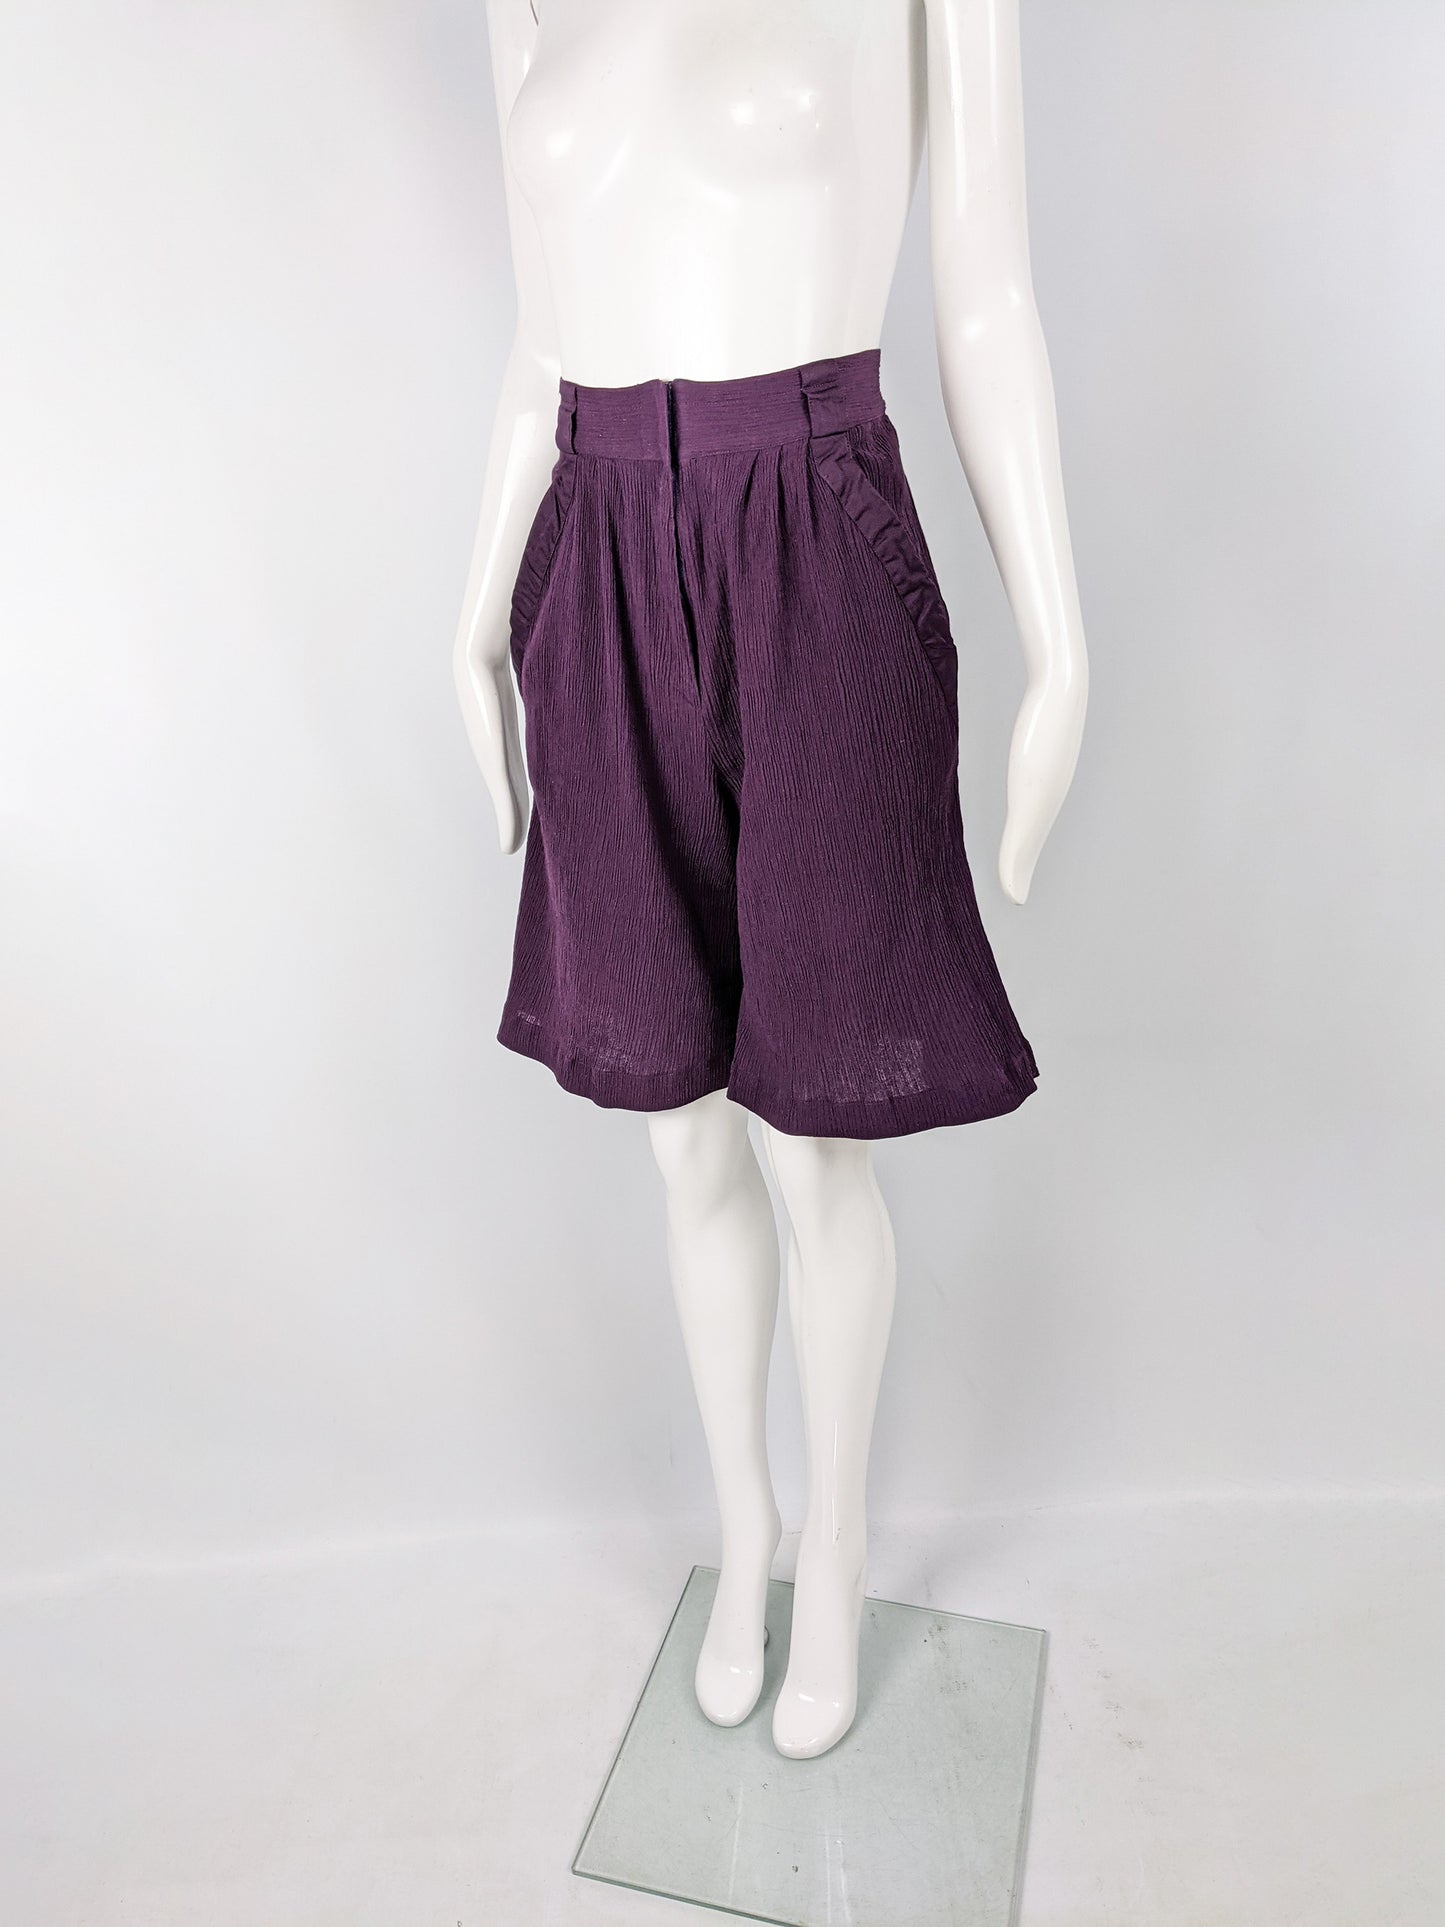 Gianni Versace Vintage Womens Fortuny Pleated Bermuda Shorts, 1980s